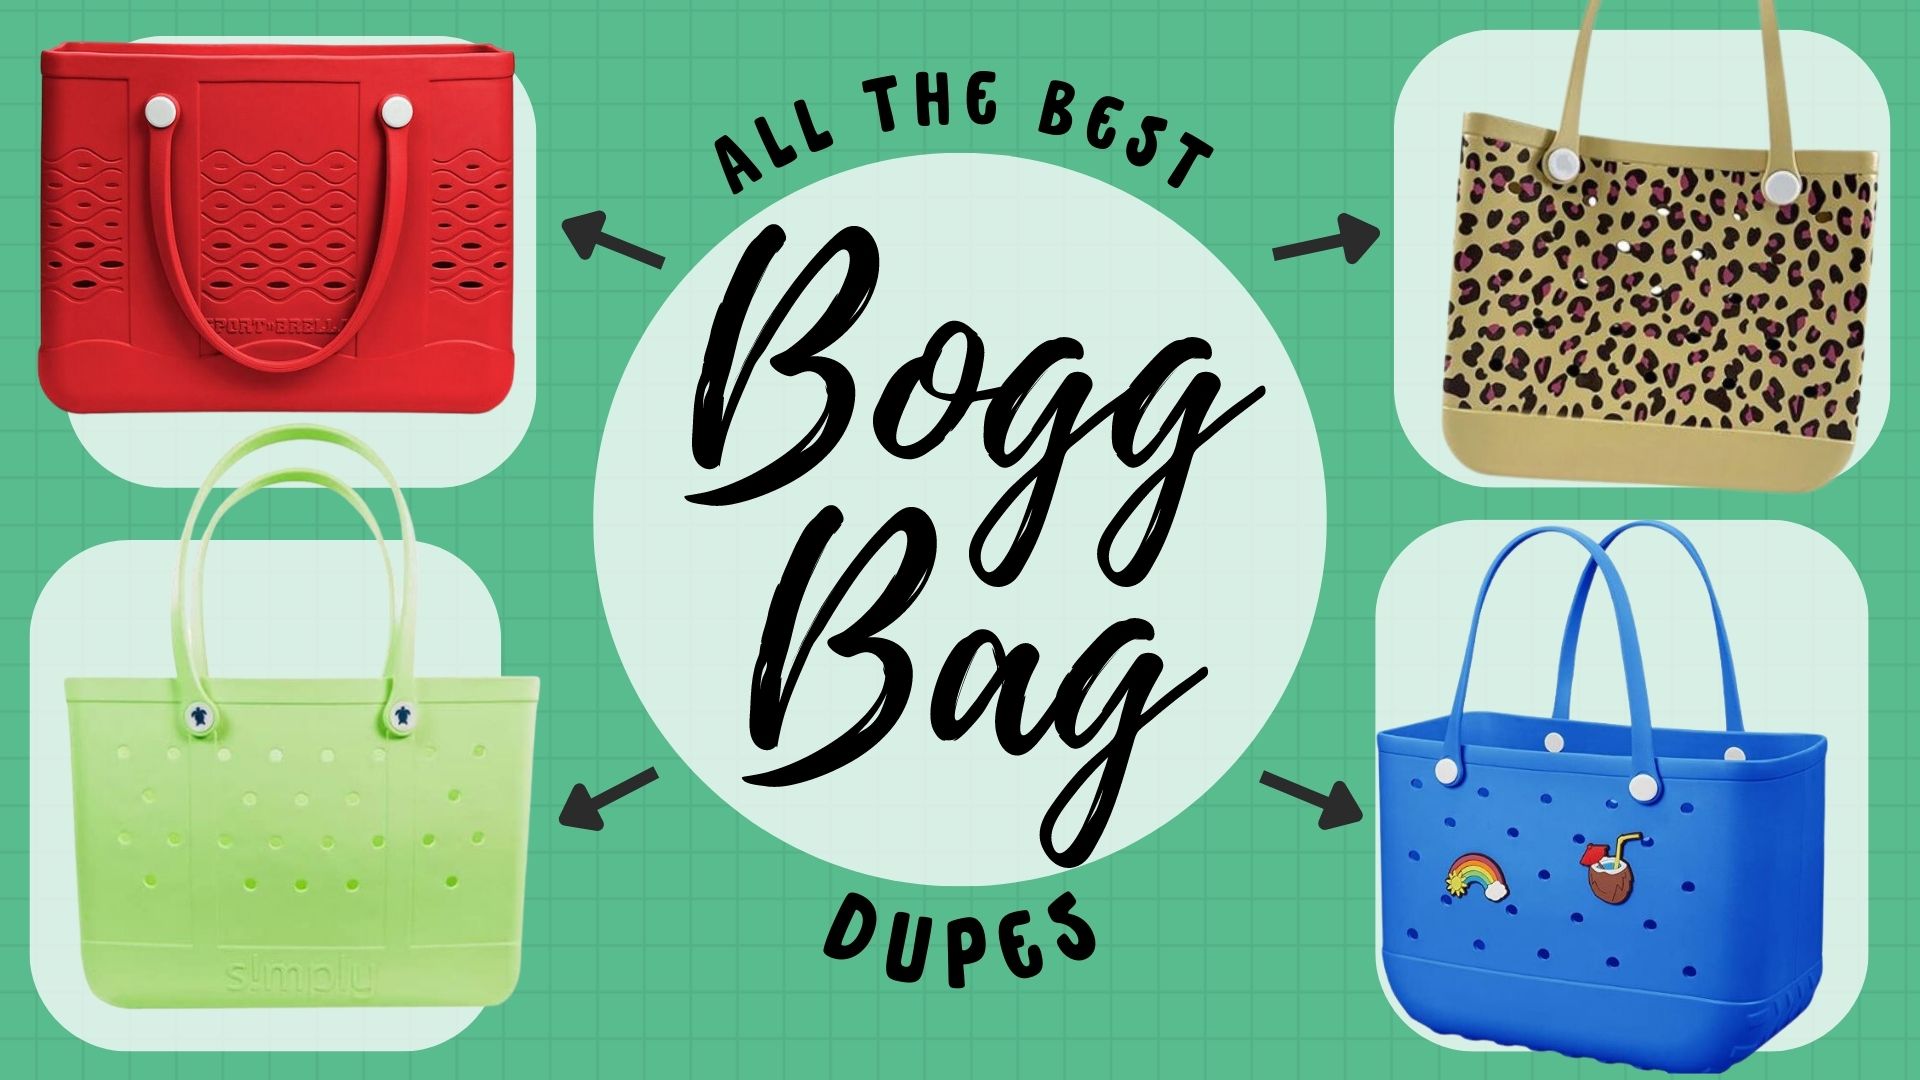 The 5 Best Cheap Bogg Bag Dupes That Will Fool Even You